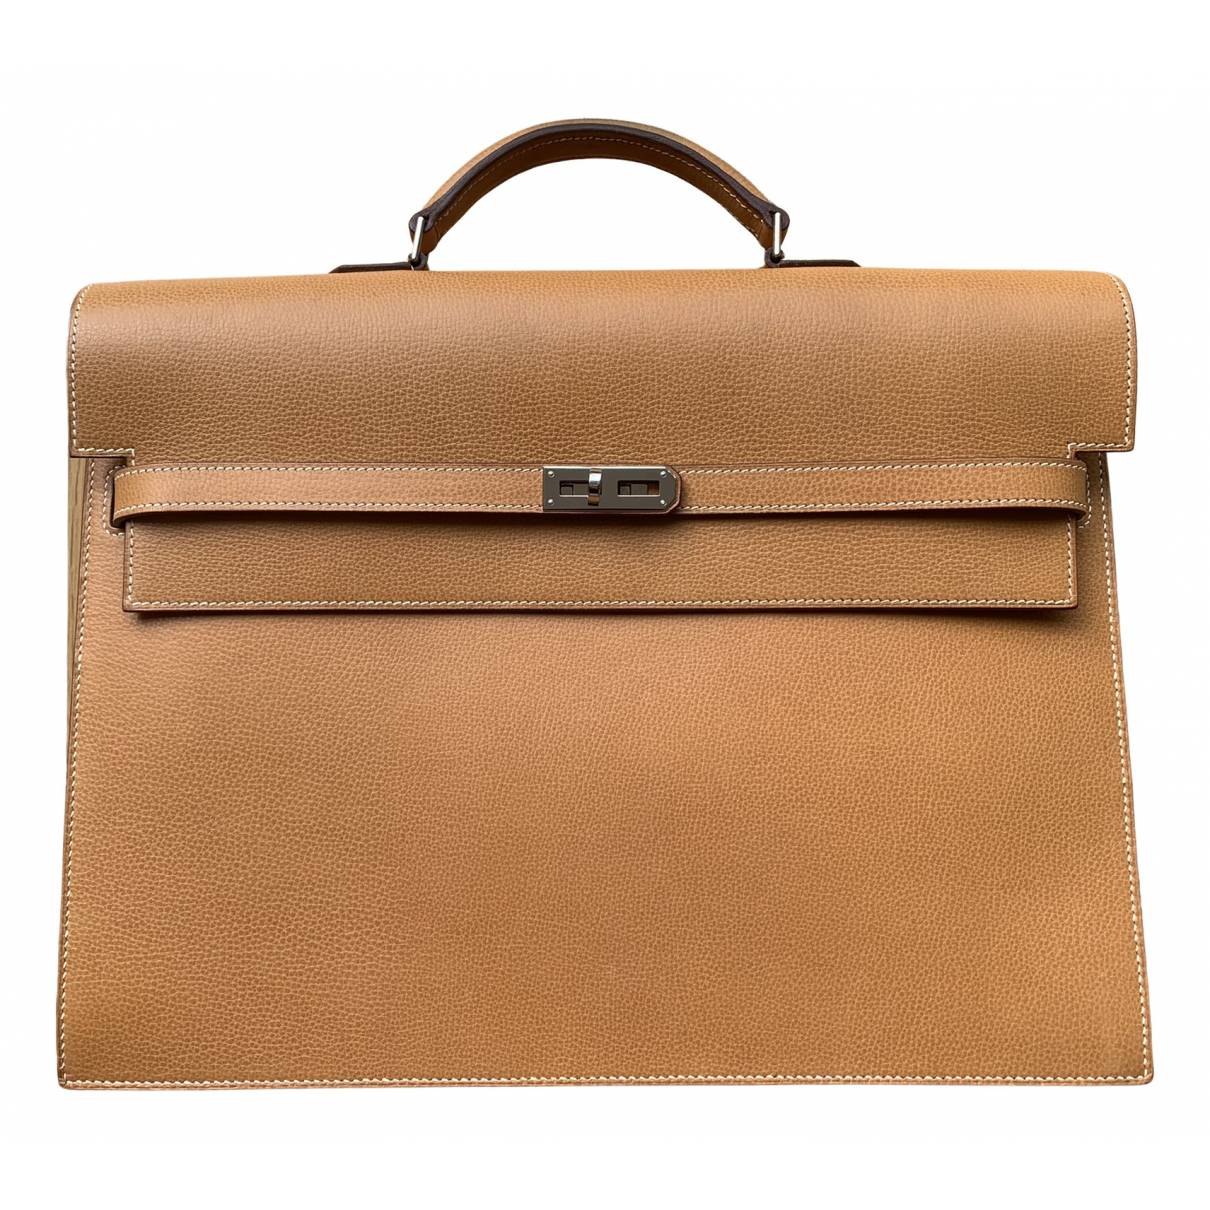 Kelly dépêches leather bag Hermès Camel in Leather - 21714259